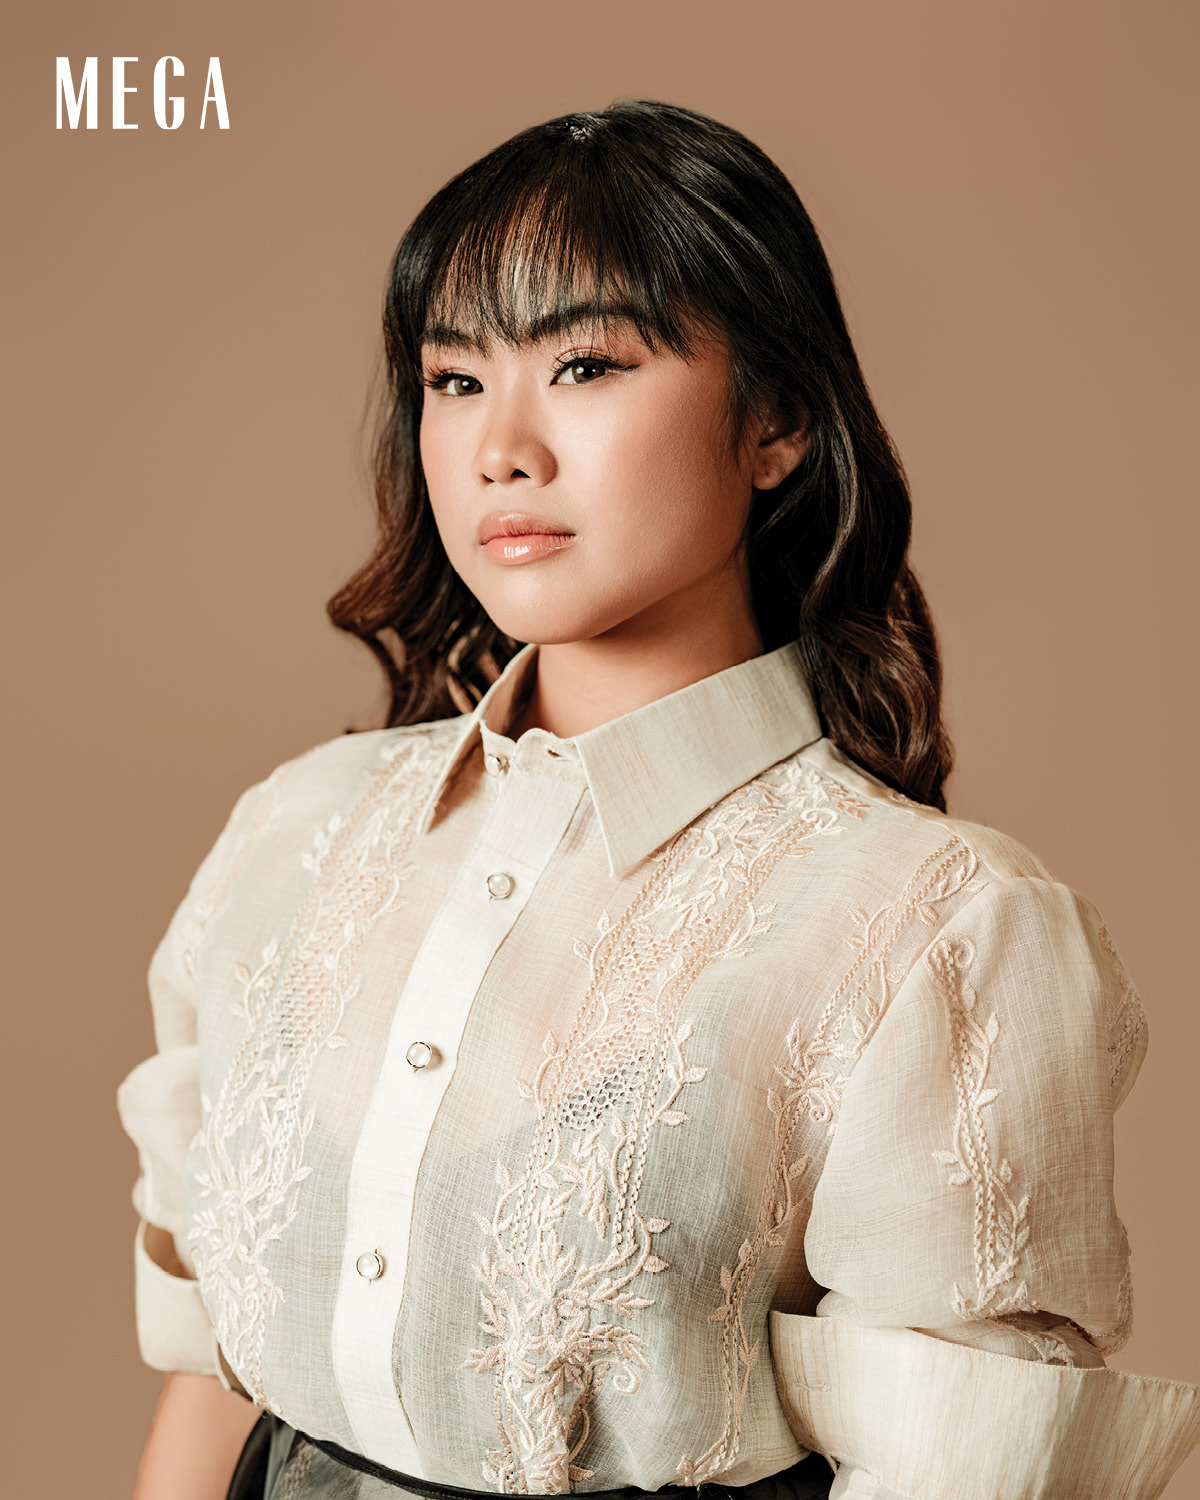 Abigail Adriano Connects to Her Filipino Heritage for Miss Saigon MEGA